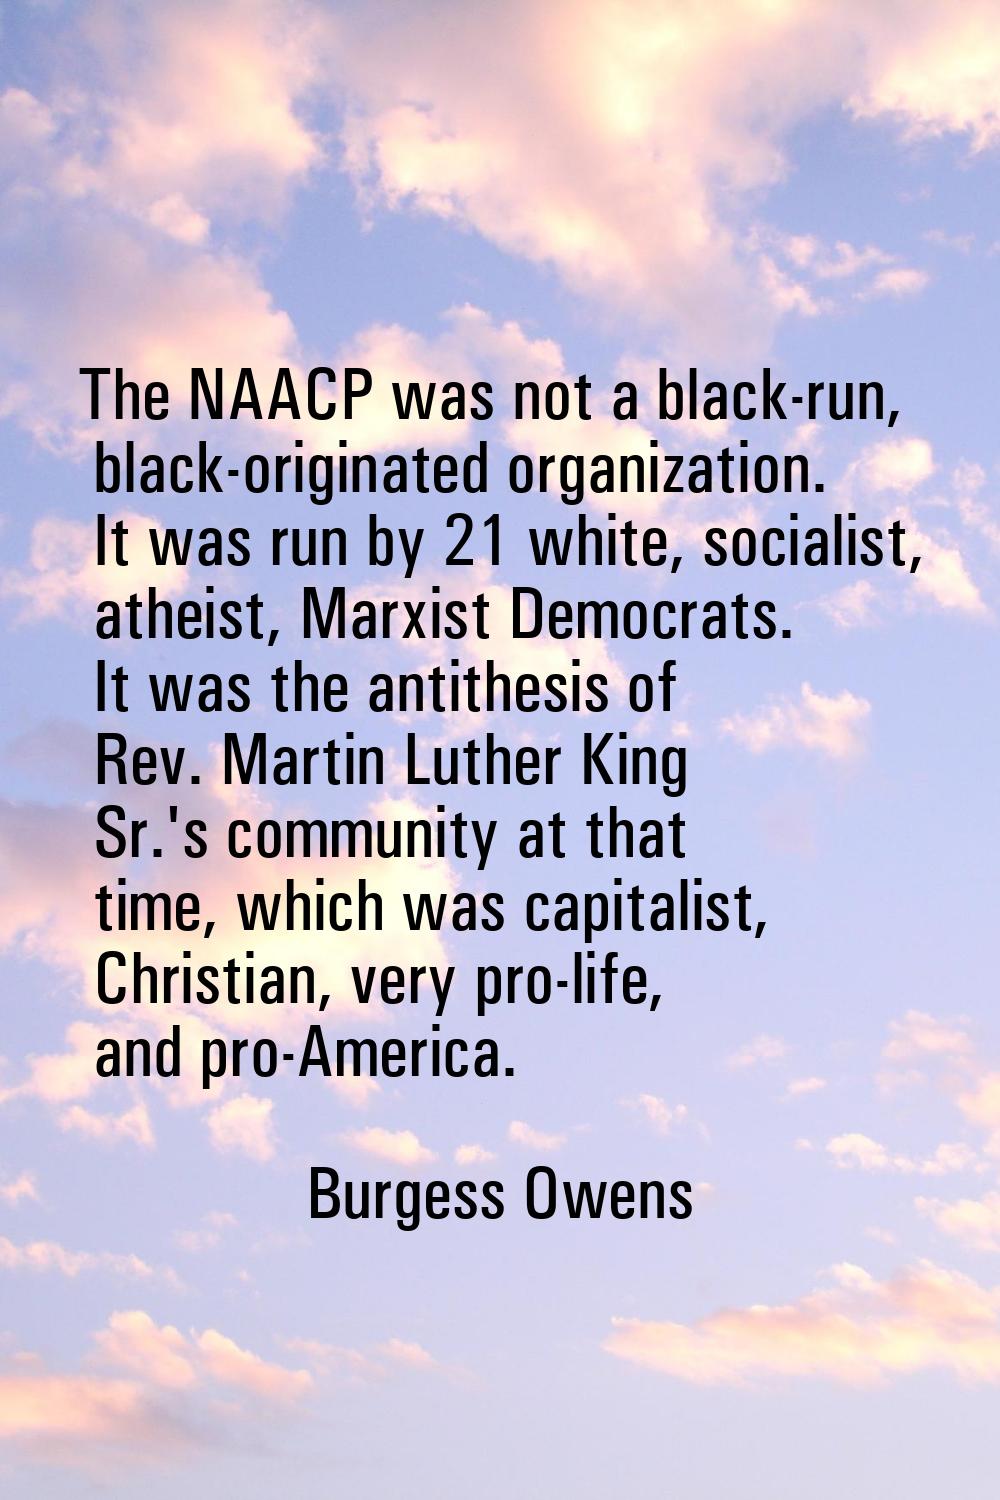 The NAACP was not a black-run, black-originated organization. It was run by 21 white, socialist, at